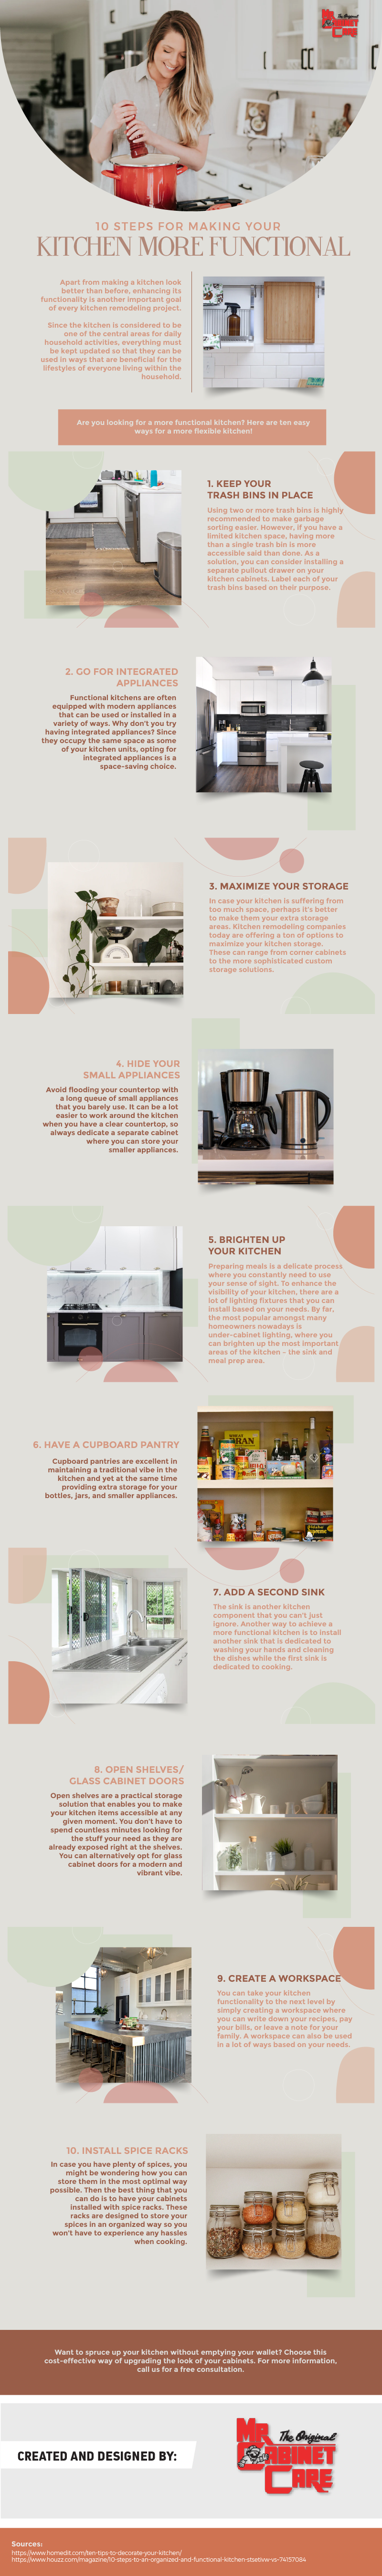 10 Steps for Making Your Kitchen More Functional 